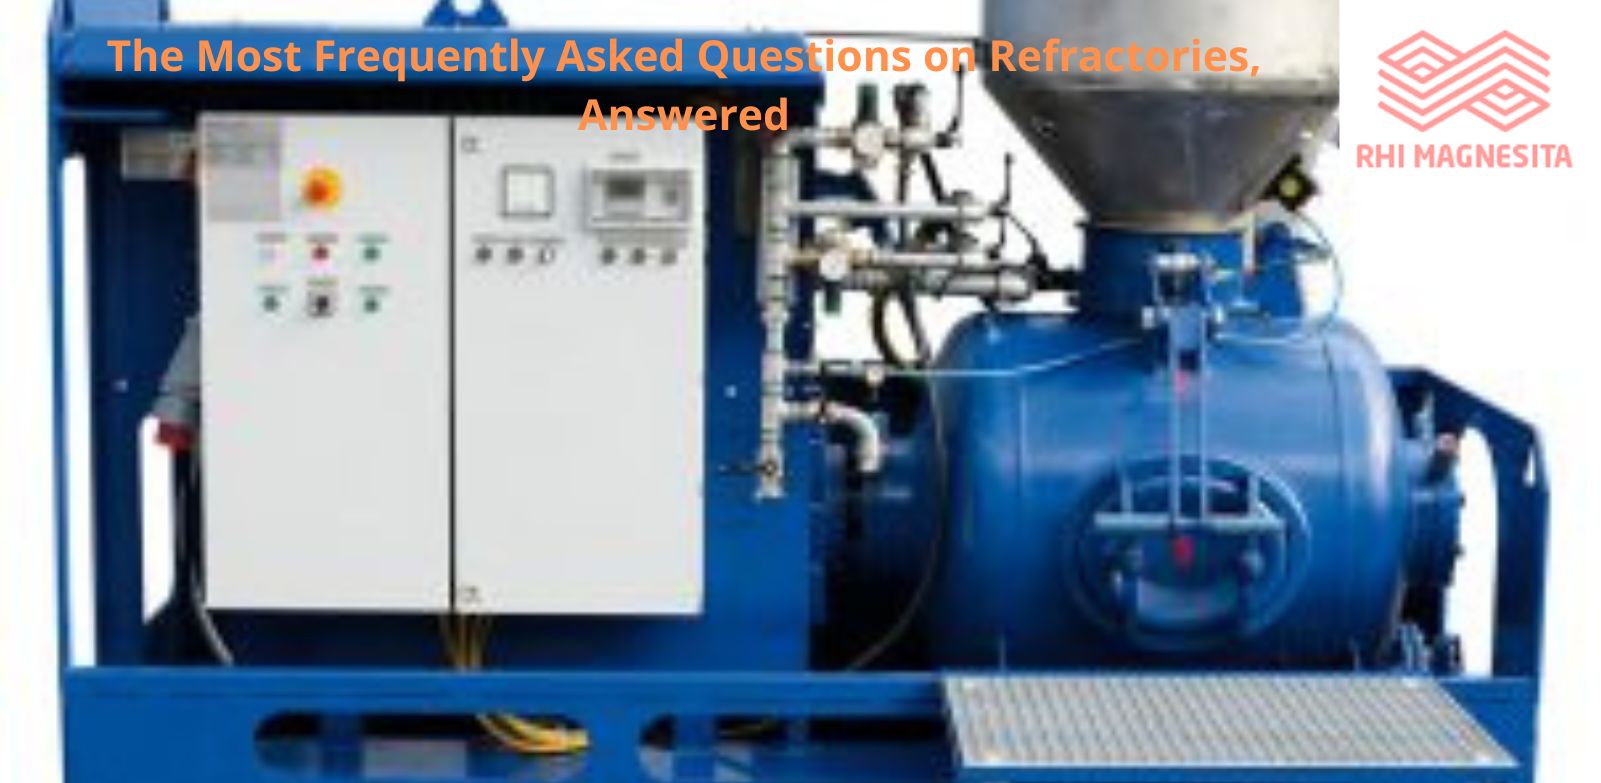 The Most Frequently Asked Questions on Refractories Answered